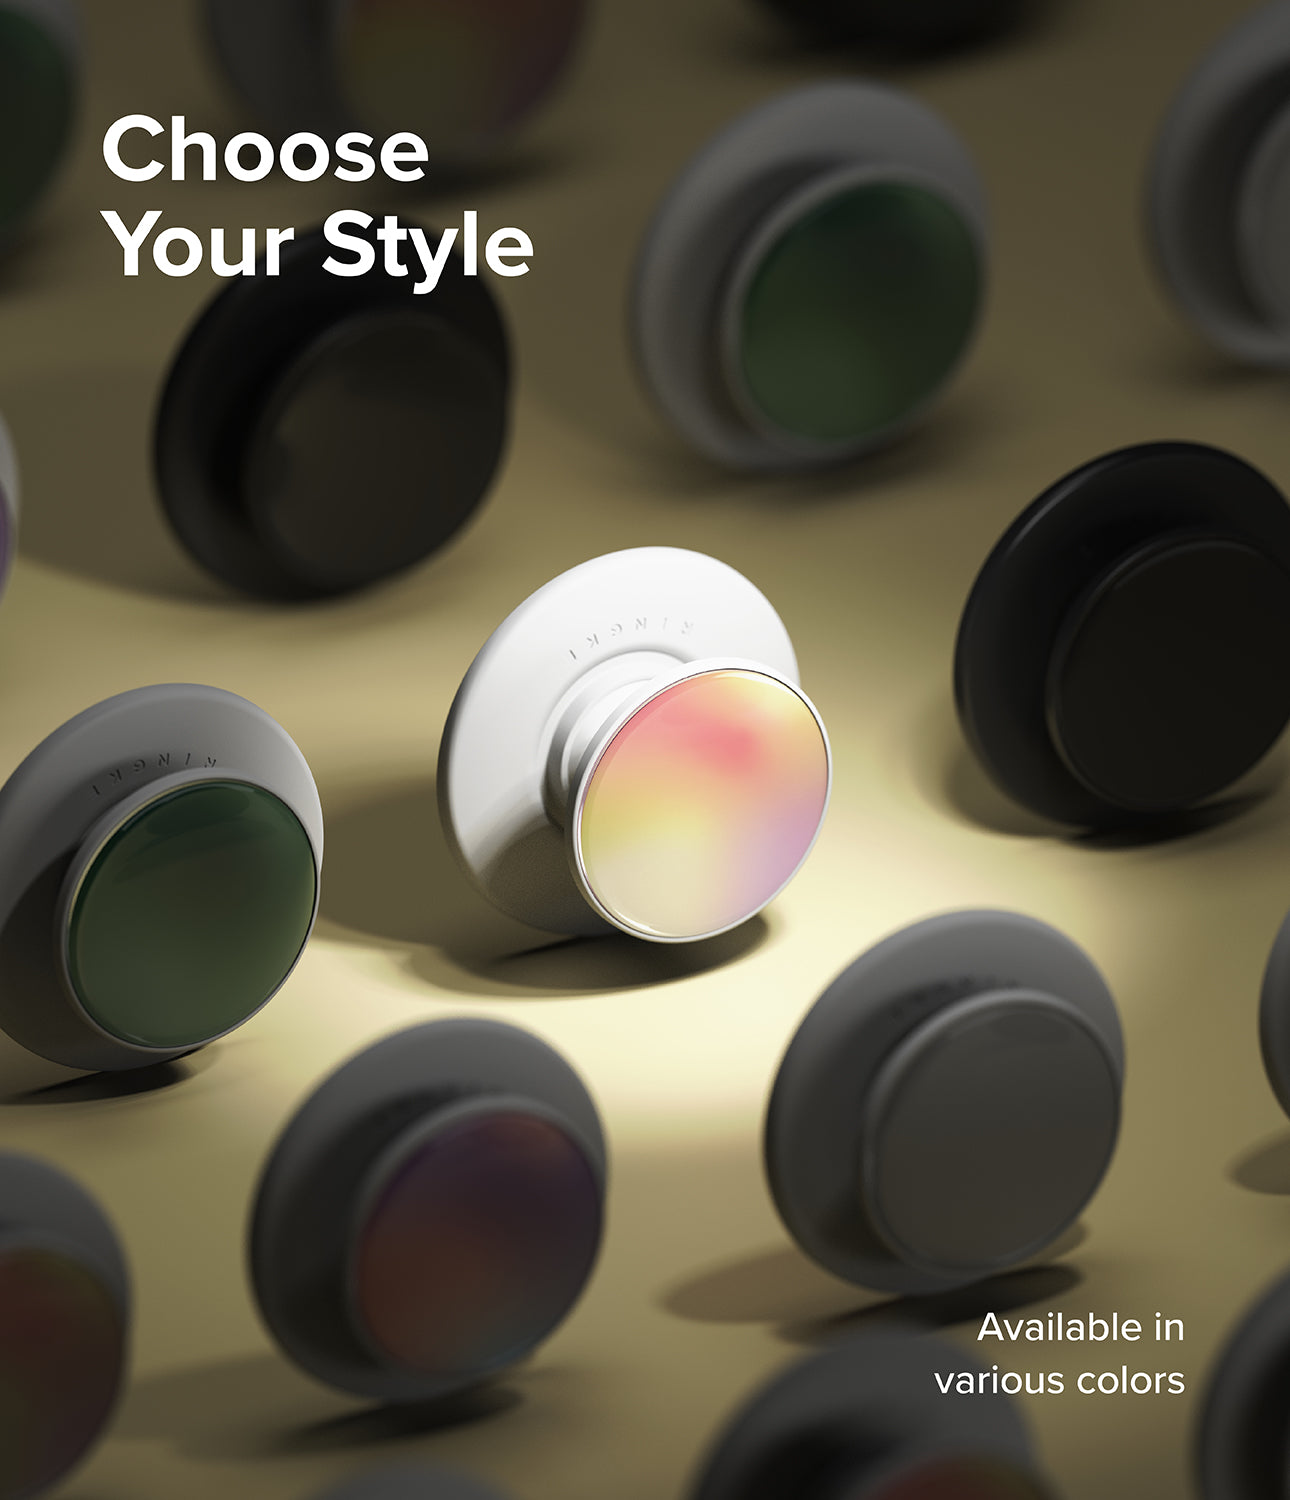 Ringke Glossy Tok Magnetic - Choose Your Style